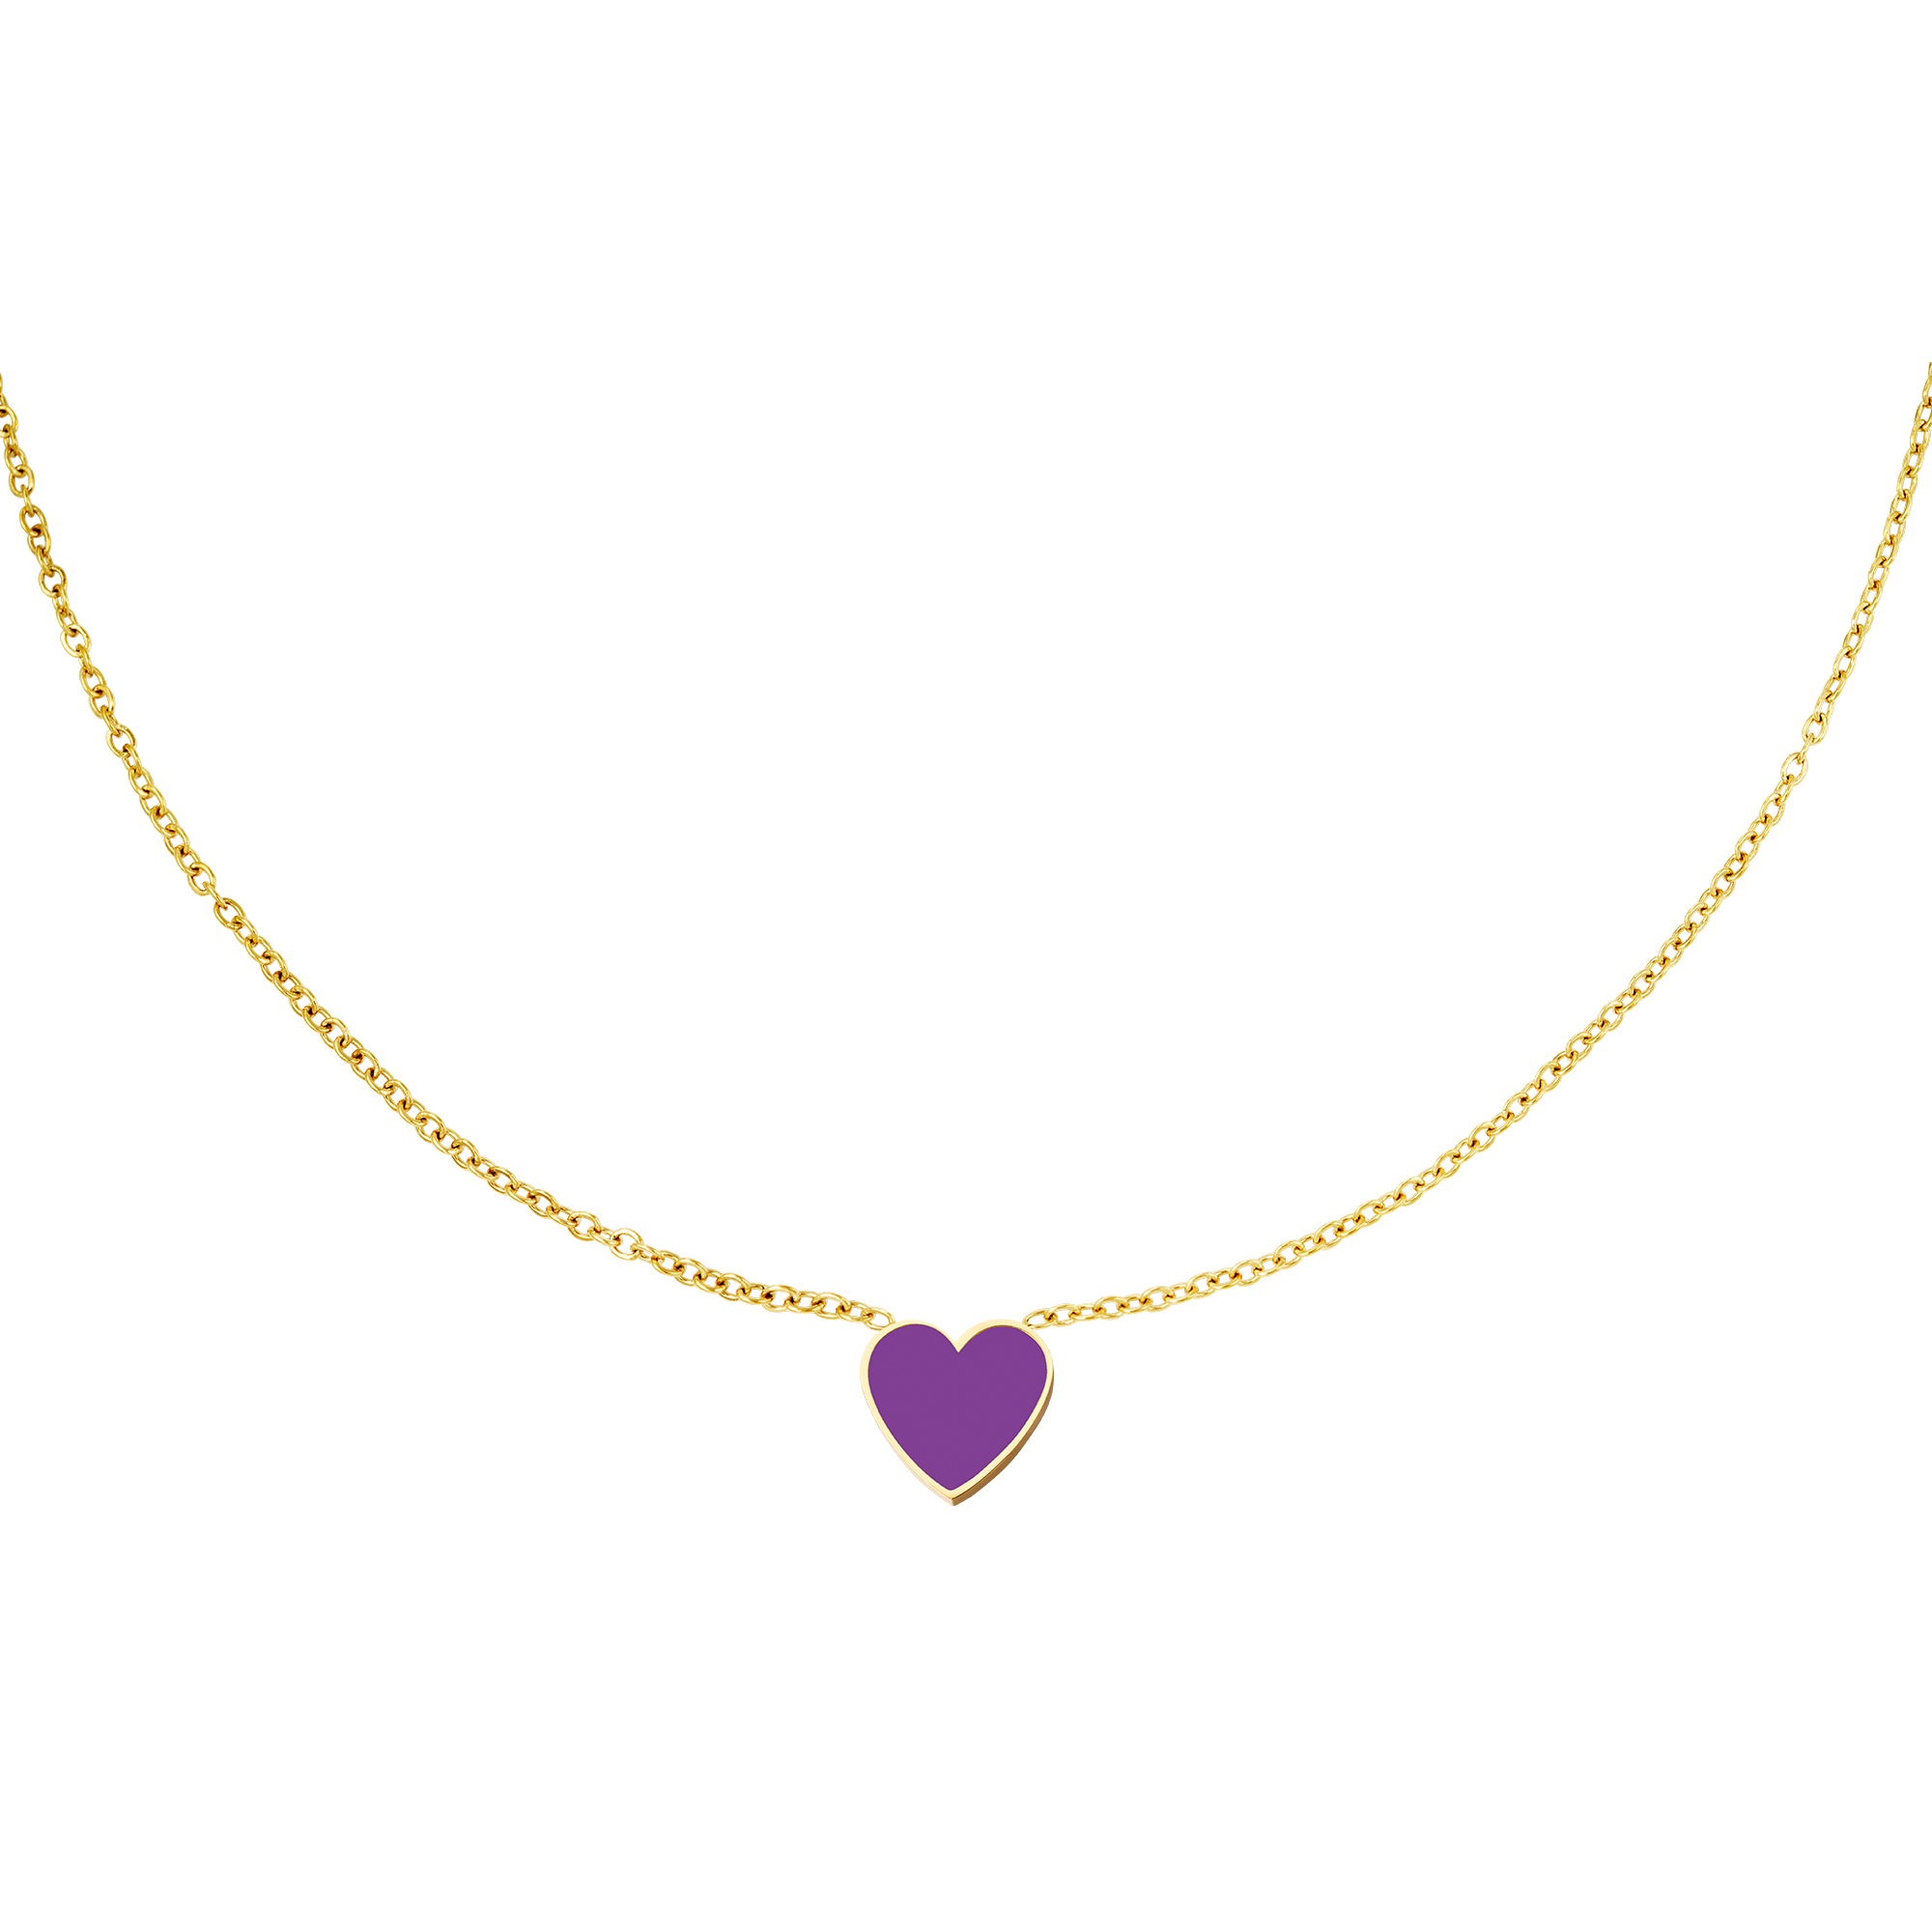 Stainless steel necklace with colorful heart charm